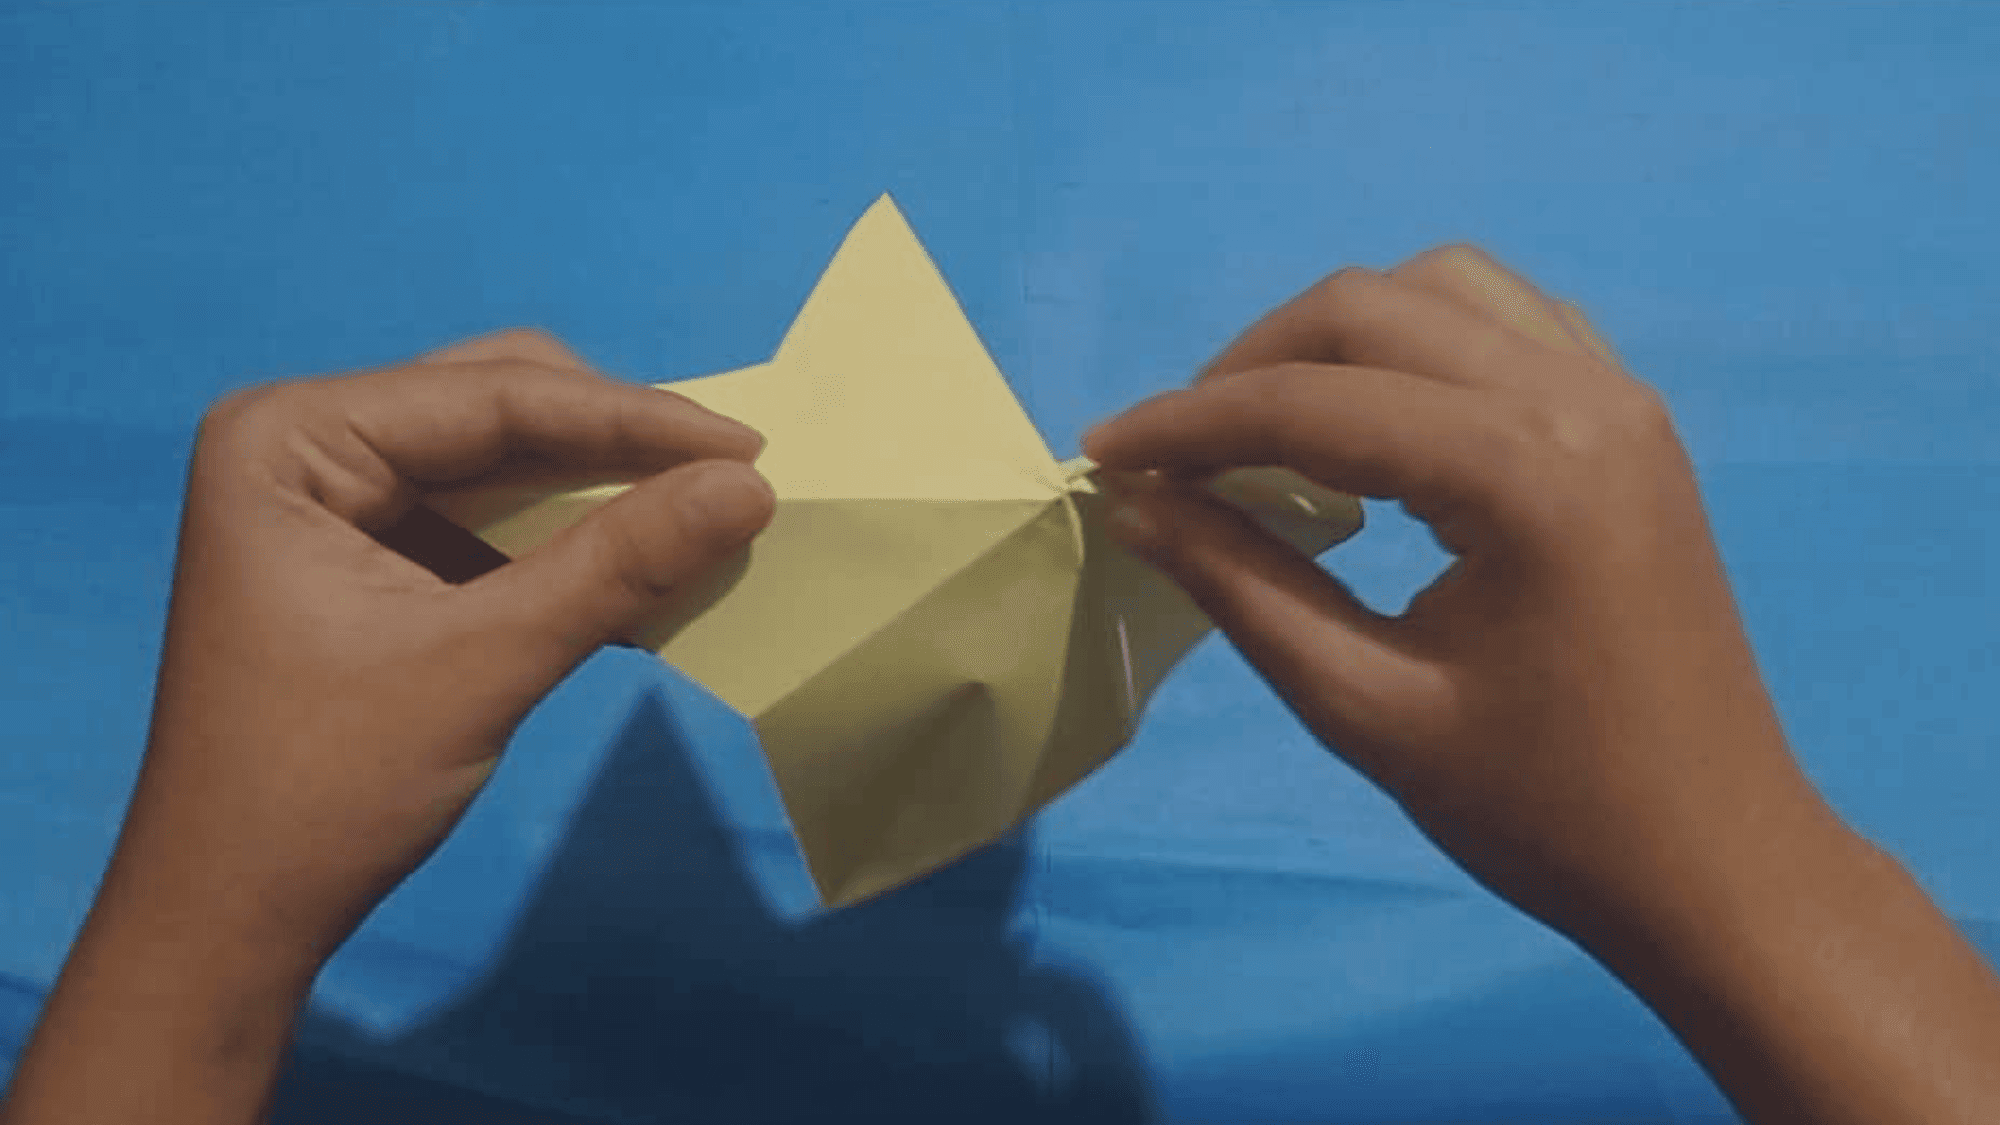 How To Make Origami Stars Origami Stars Instructions 7773